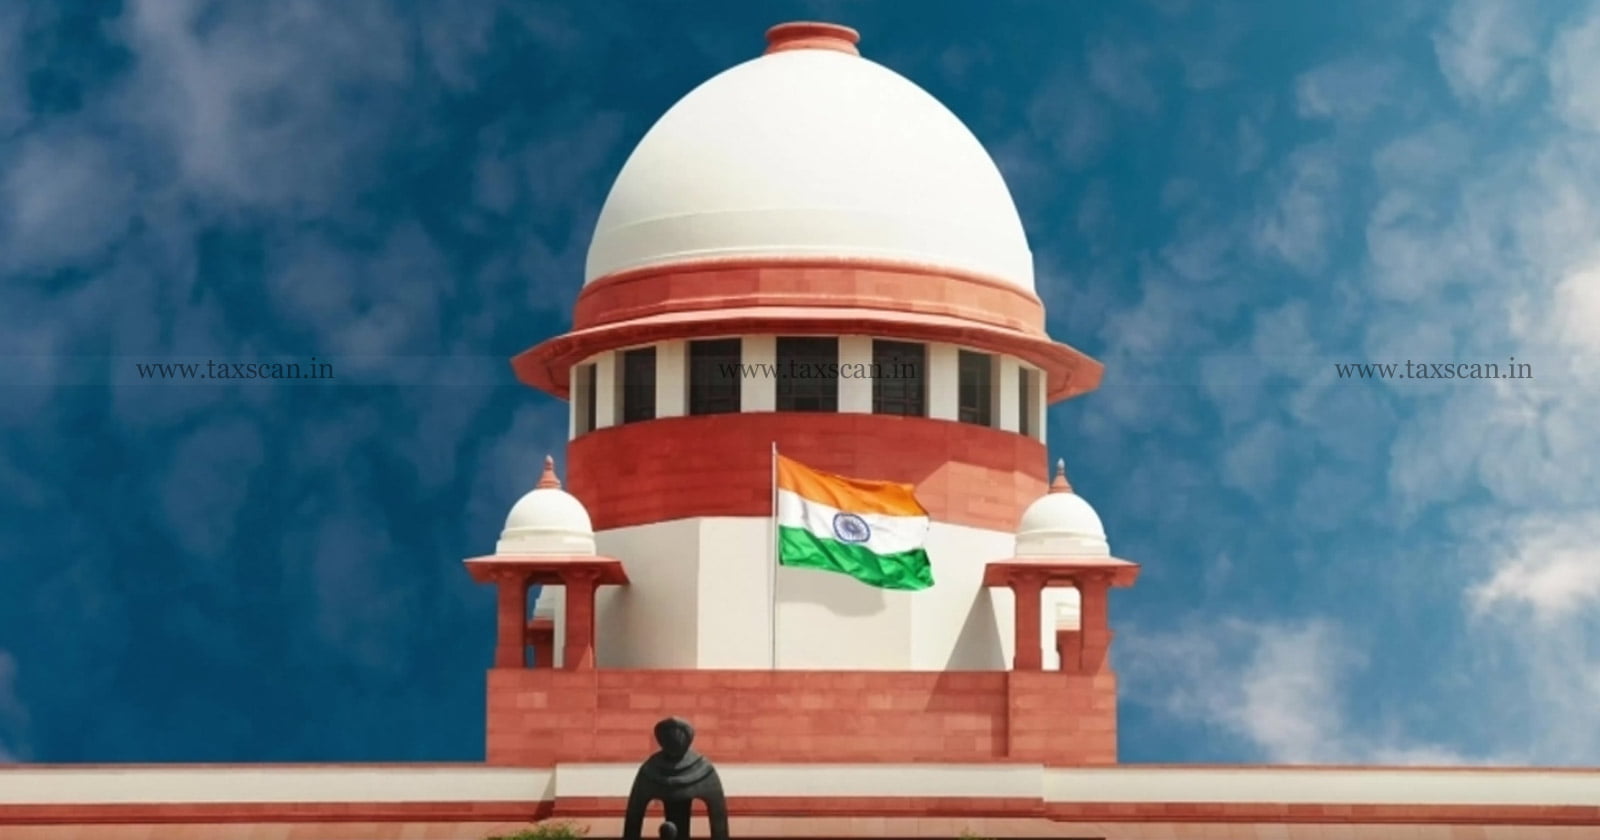 Supreme Court - tenure extension - ITAT member - delayed appointment - ITR - non filing - Madras Bar Association case - ITAT - Taxscan